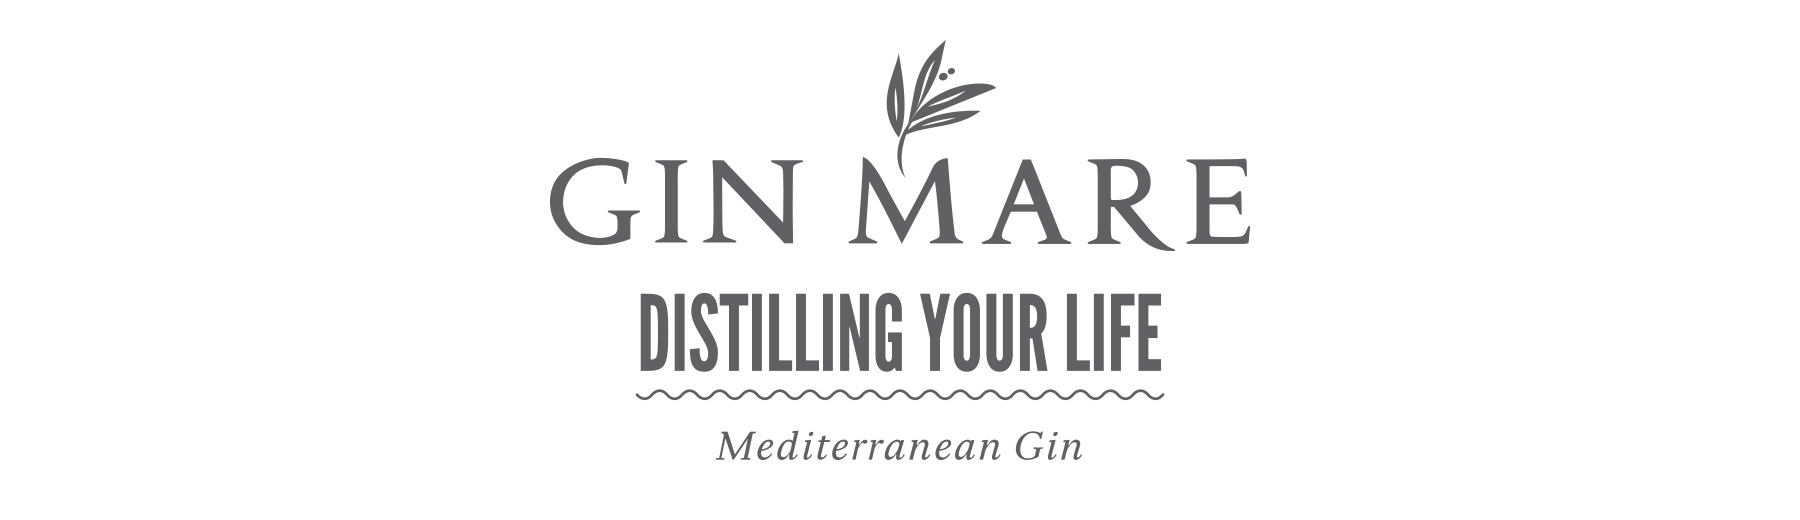 Gin Mare Distilling your life